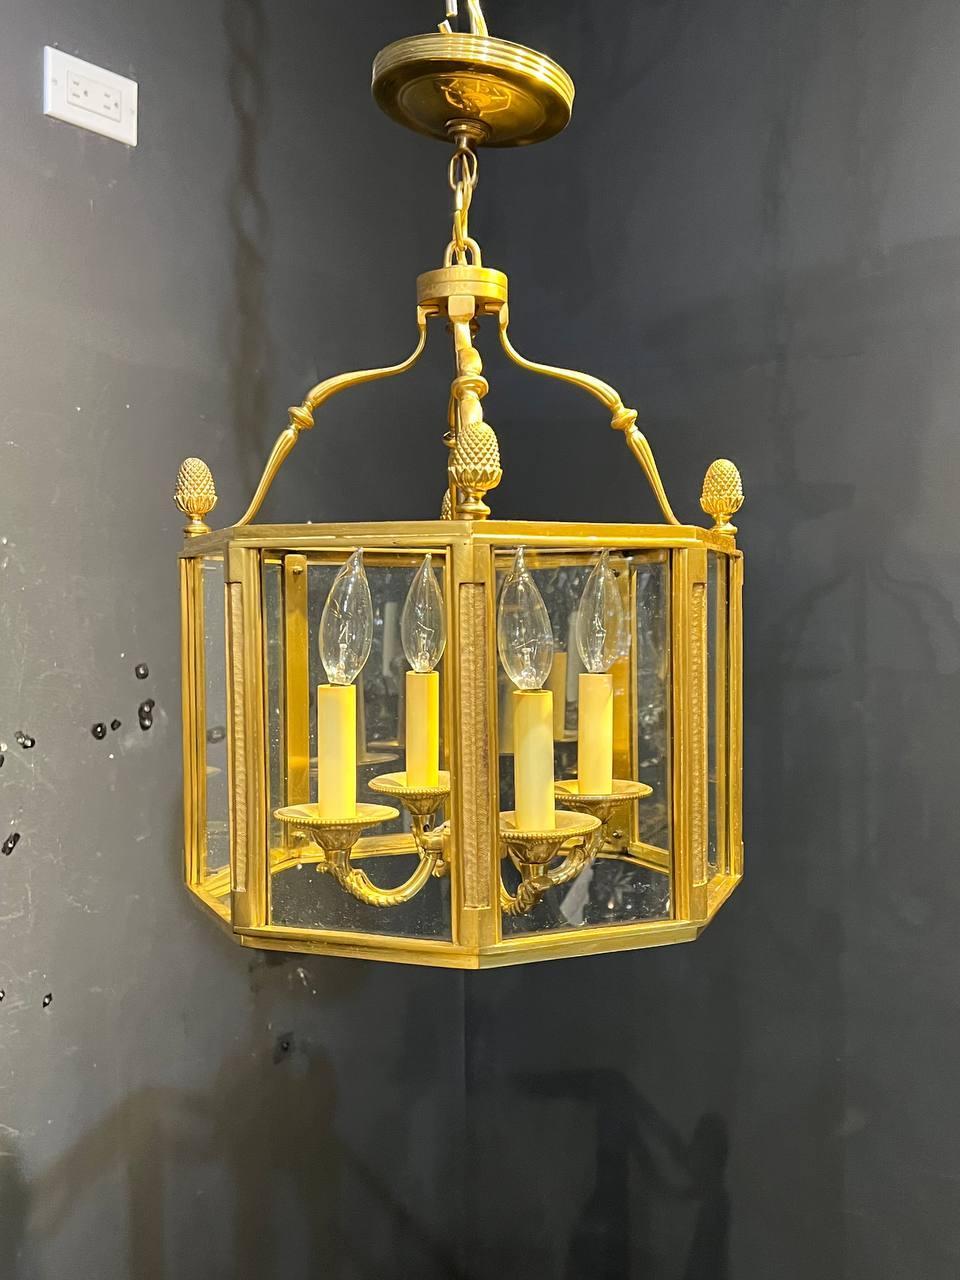 A circa 1930's French gilt bronze Empire style indoor lantern with glass panels inset.